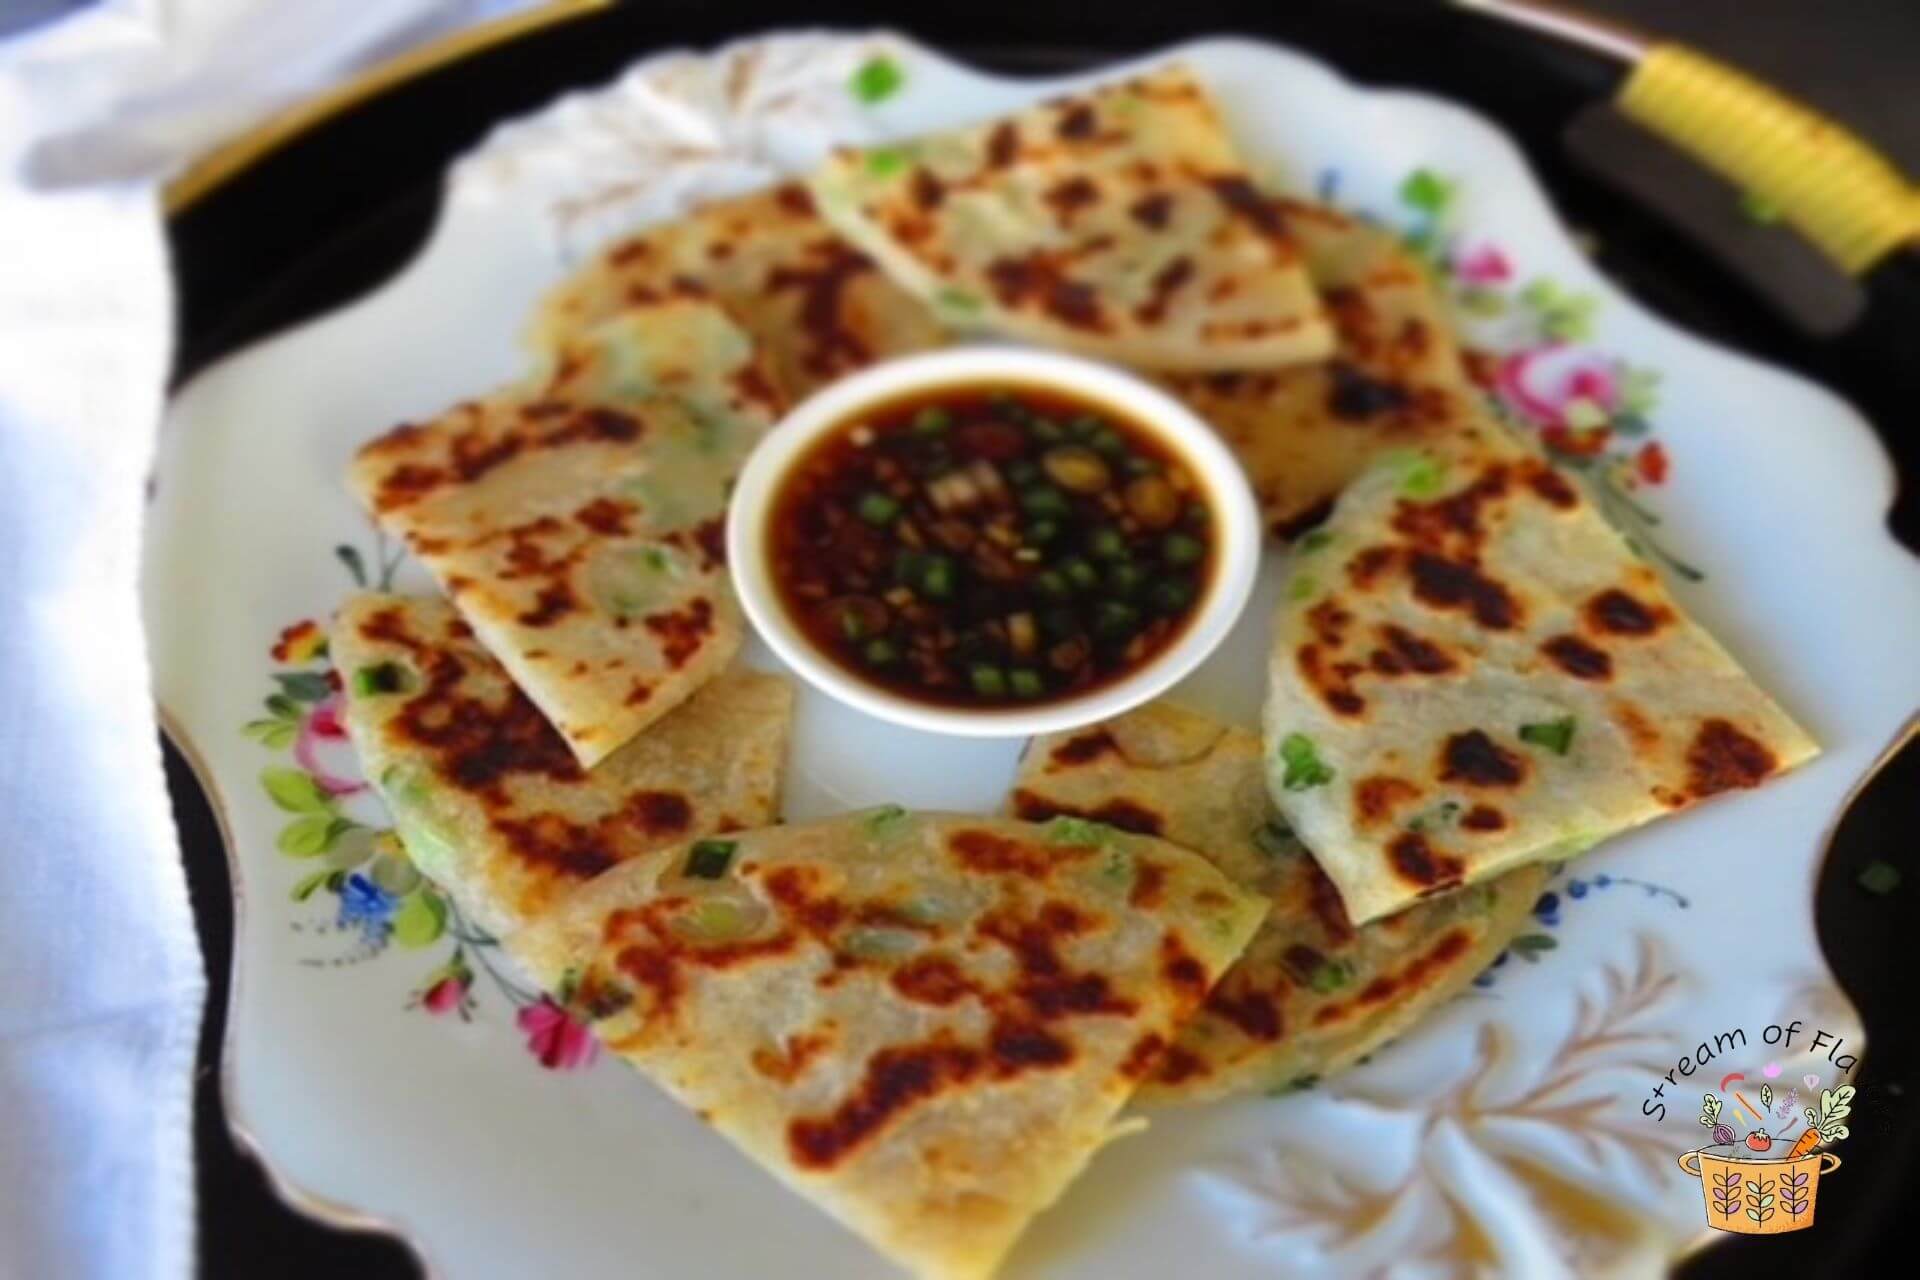 green onion pancakes with sauce